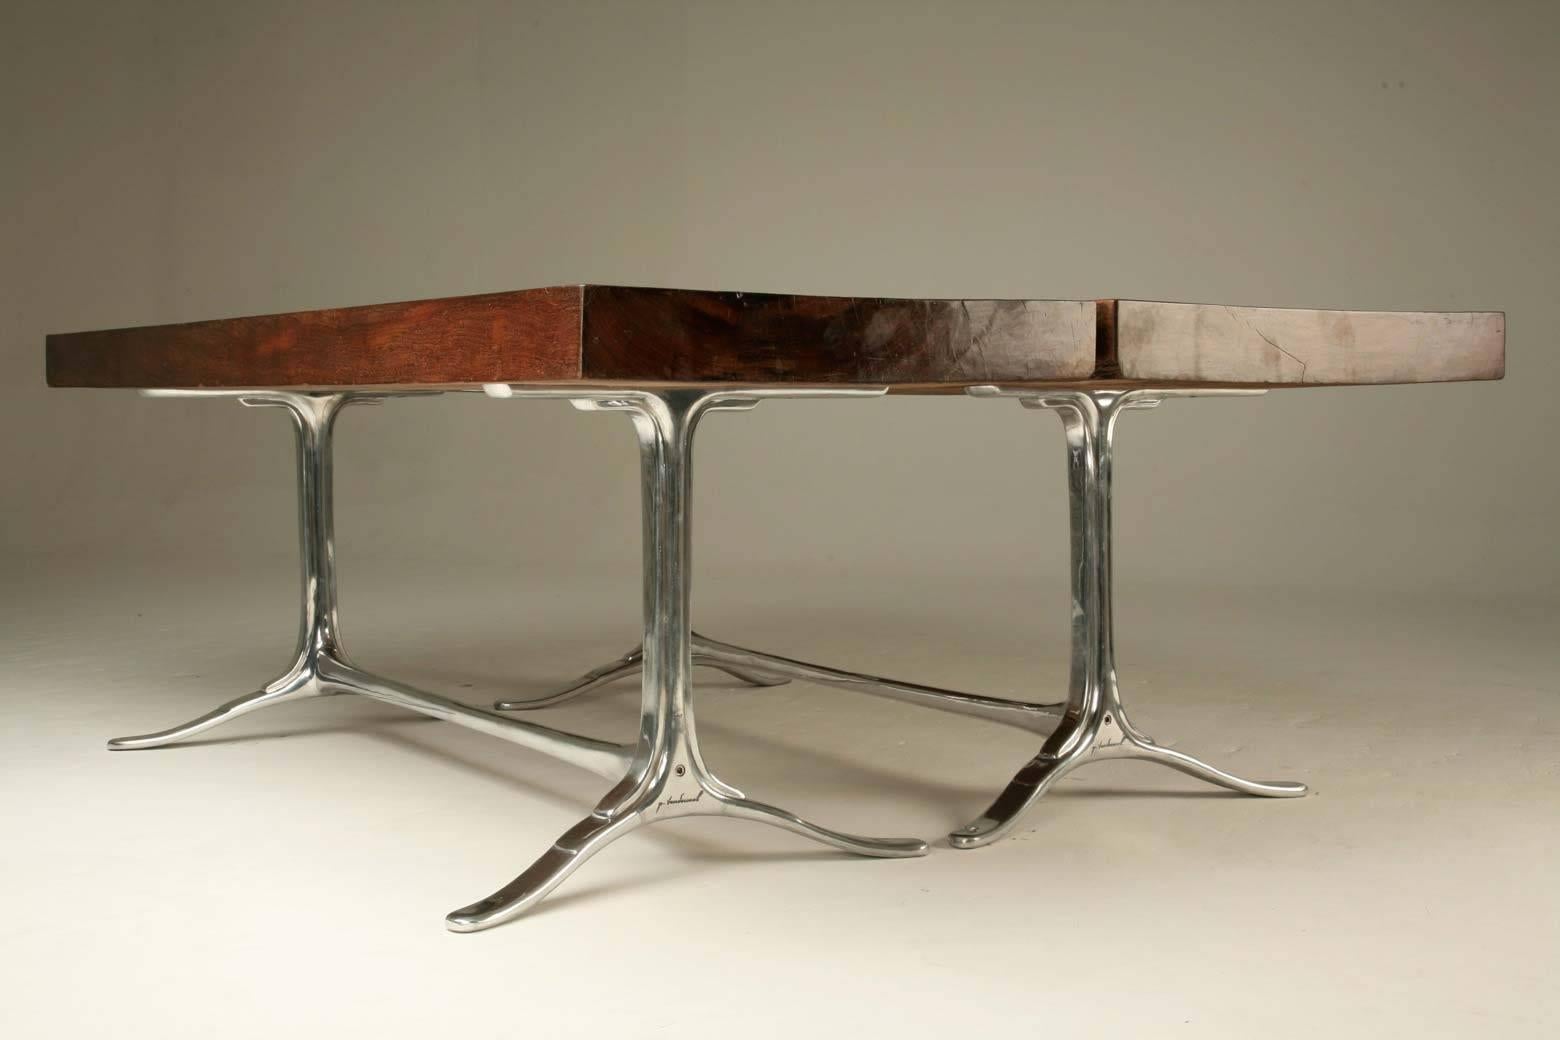 Pair of Tables, Antique Hardwood on Sand-Cast Aluminum Base, by P. Tendercool For Sale 1